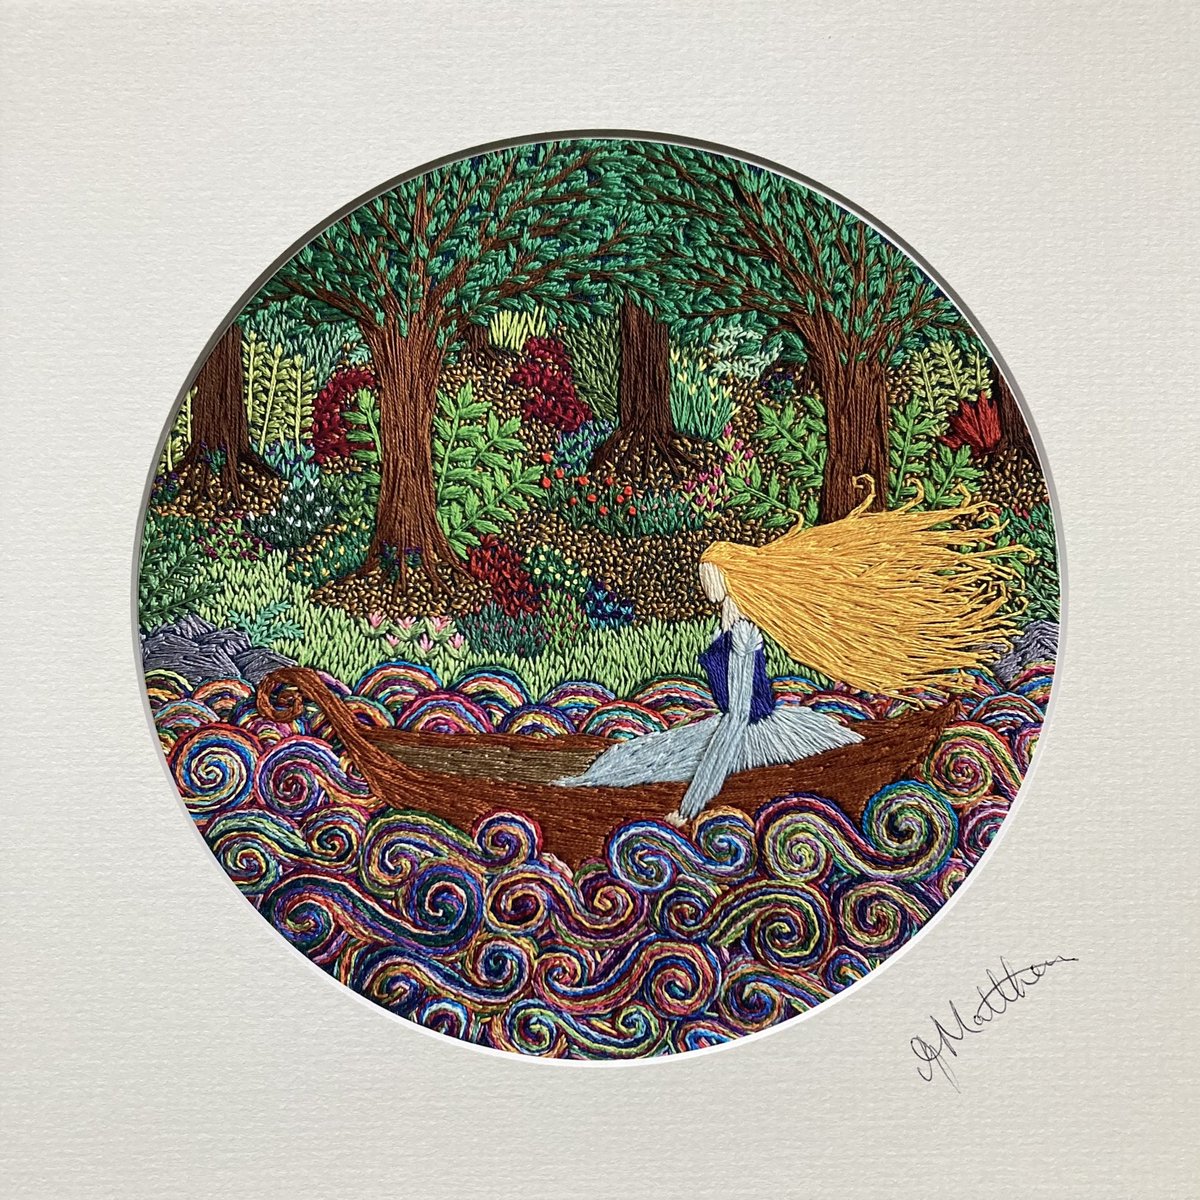 It takes many hours, days and weeks to create just one of my embroideries, and sometimes over 50 skeins of thread. Here is what my embroidery, The River Maiden looks like as a Fine art print. All mounted, signed & ready to pop into a frame…🧵🪡🌿#affordableart #thesewingsongbird